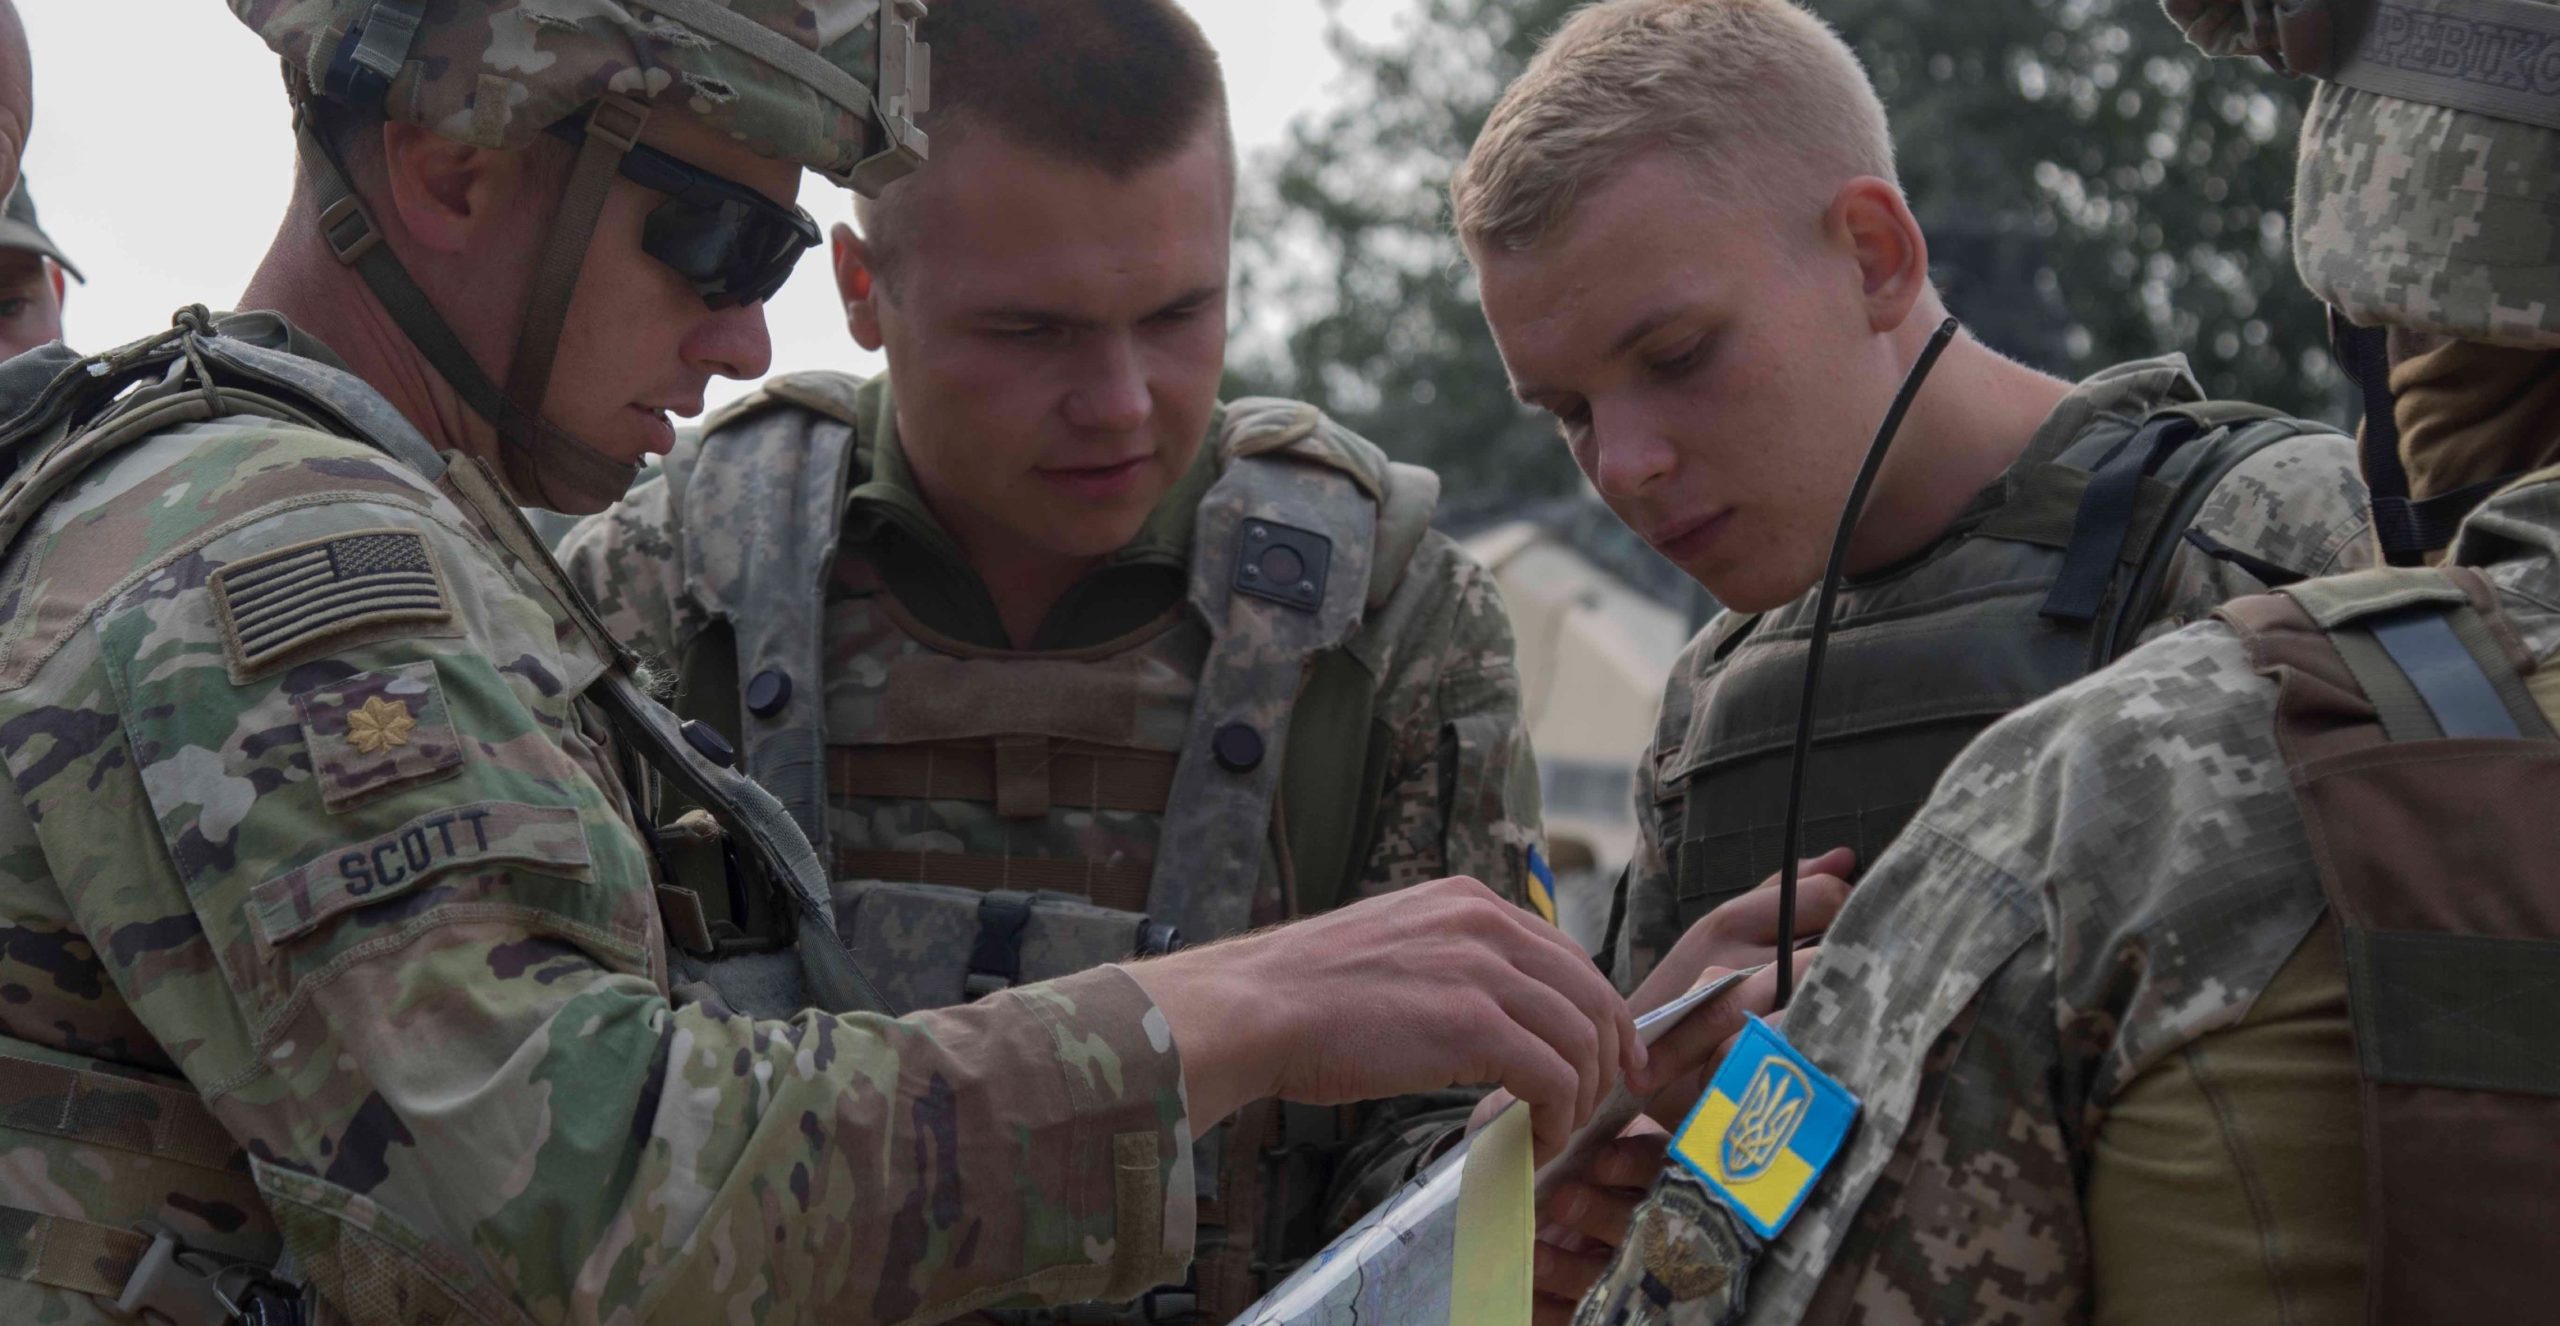 Ukrainian military participating in the international military exercise Combined Resolve XIV at the US Army Training Center in Germany. (Source: mil.gov.ua)